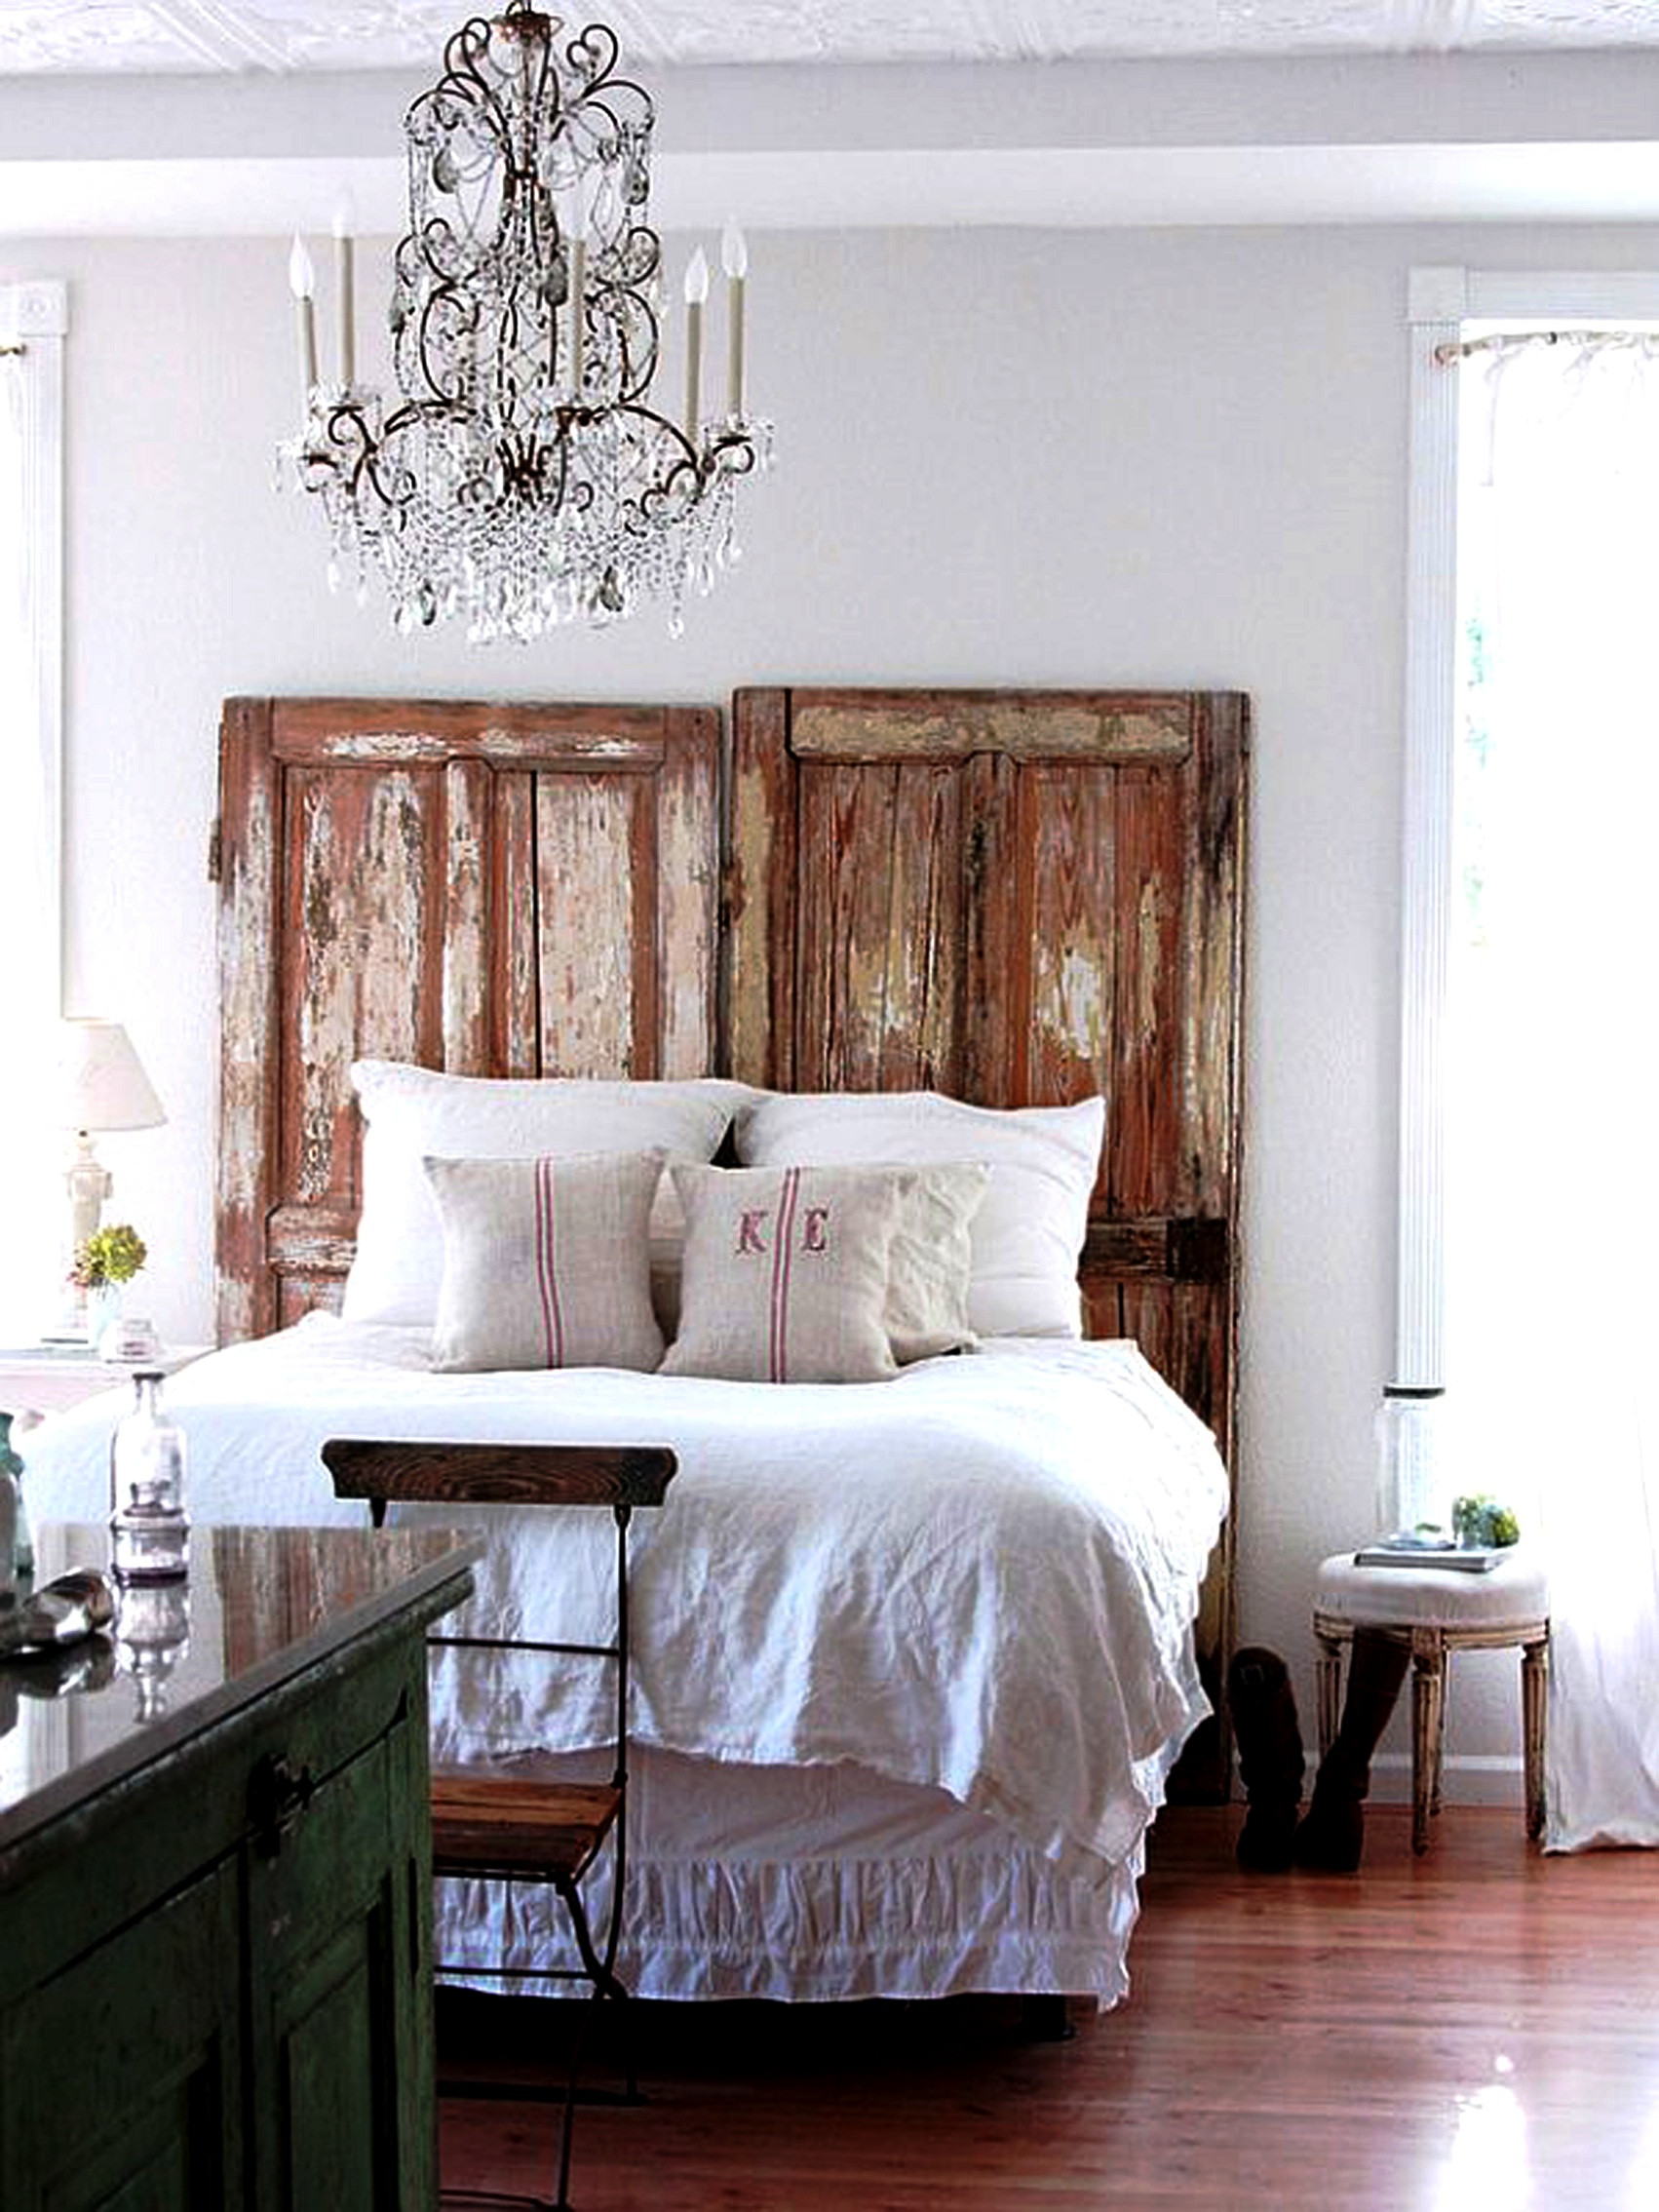 White Rustic Bedroom
 Rustic Chic Home Decor Ideas – You Bet Your Pierogi